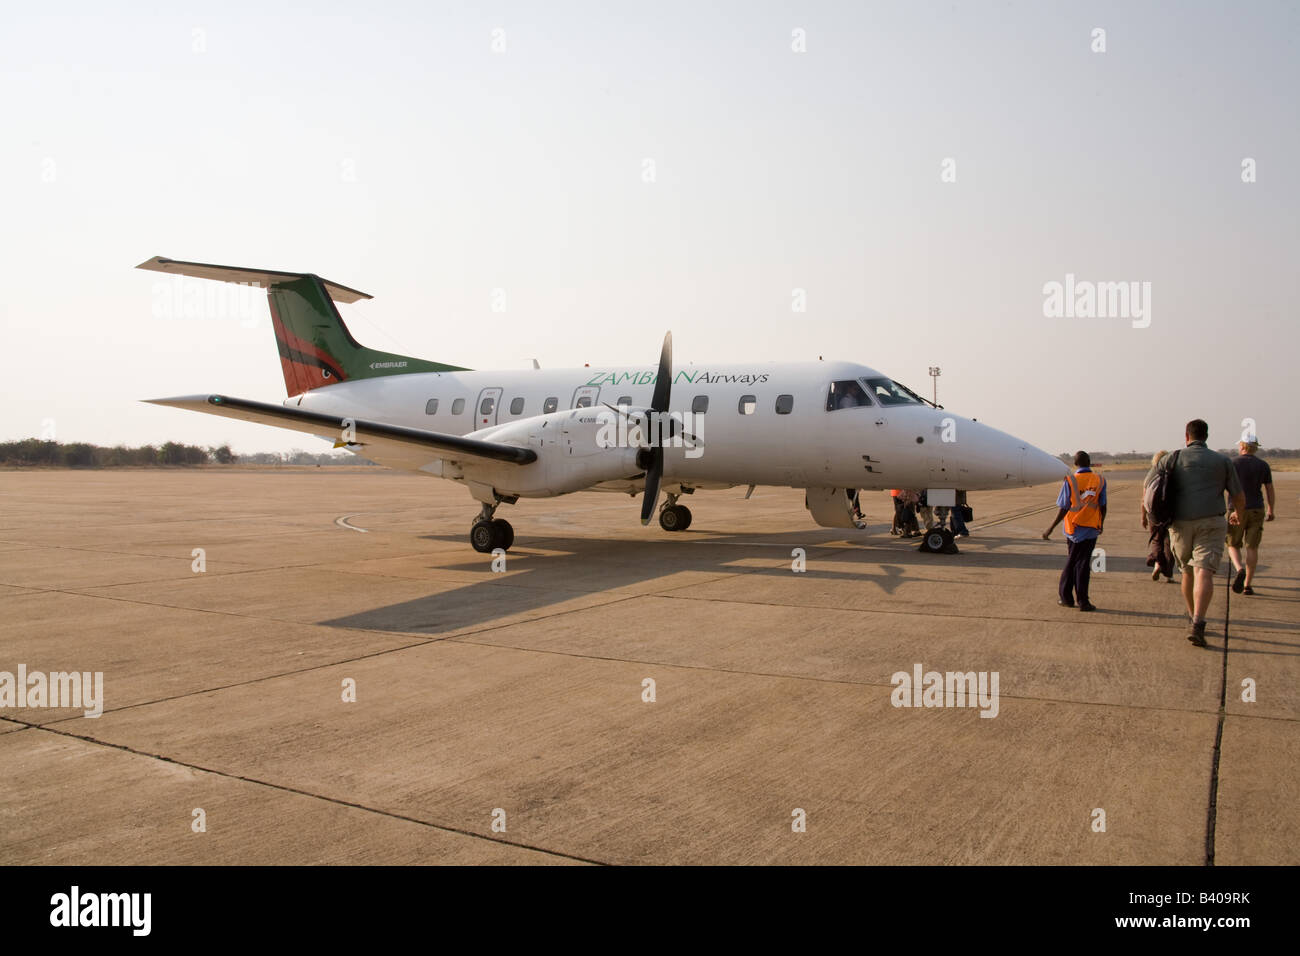 Zambian airways plane on the runway at Livingstone airport flying to Lusaka Zambia Africa Stock Photo